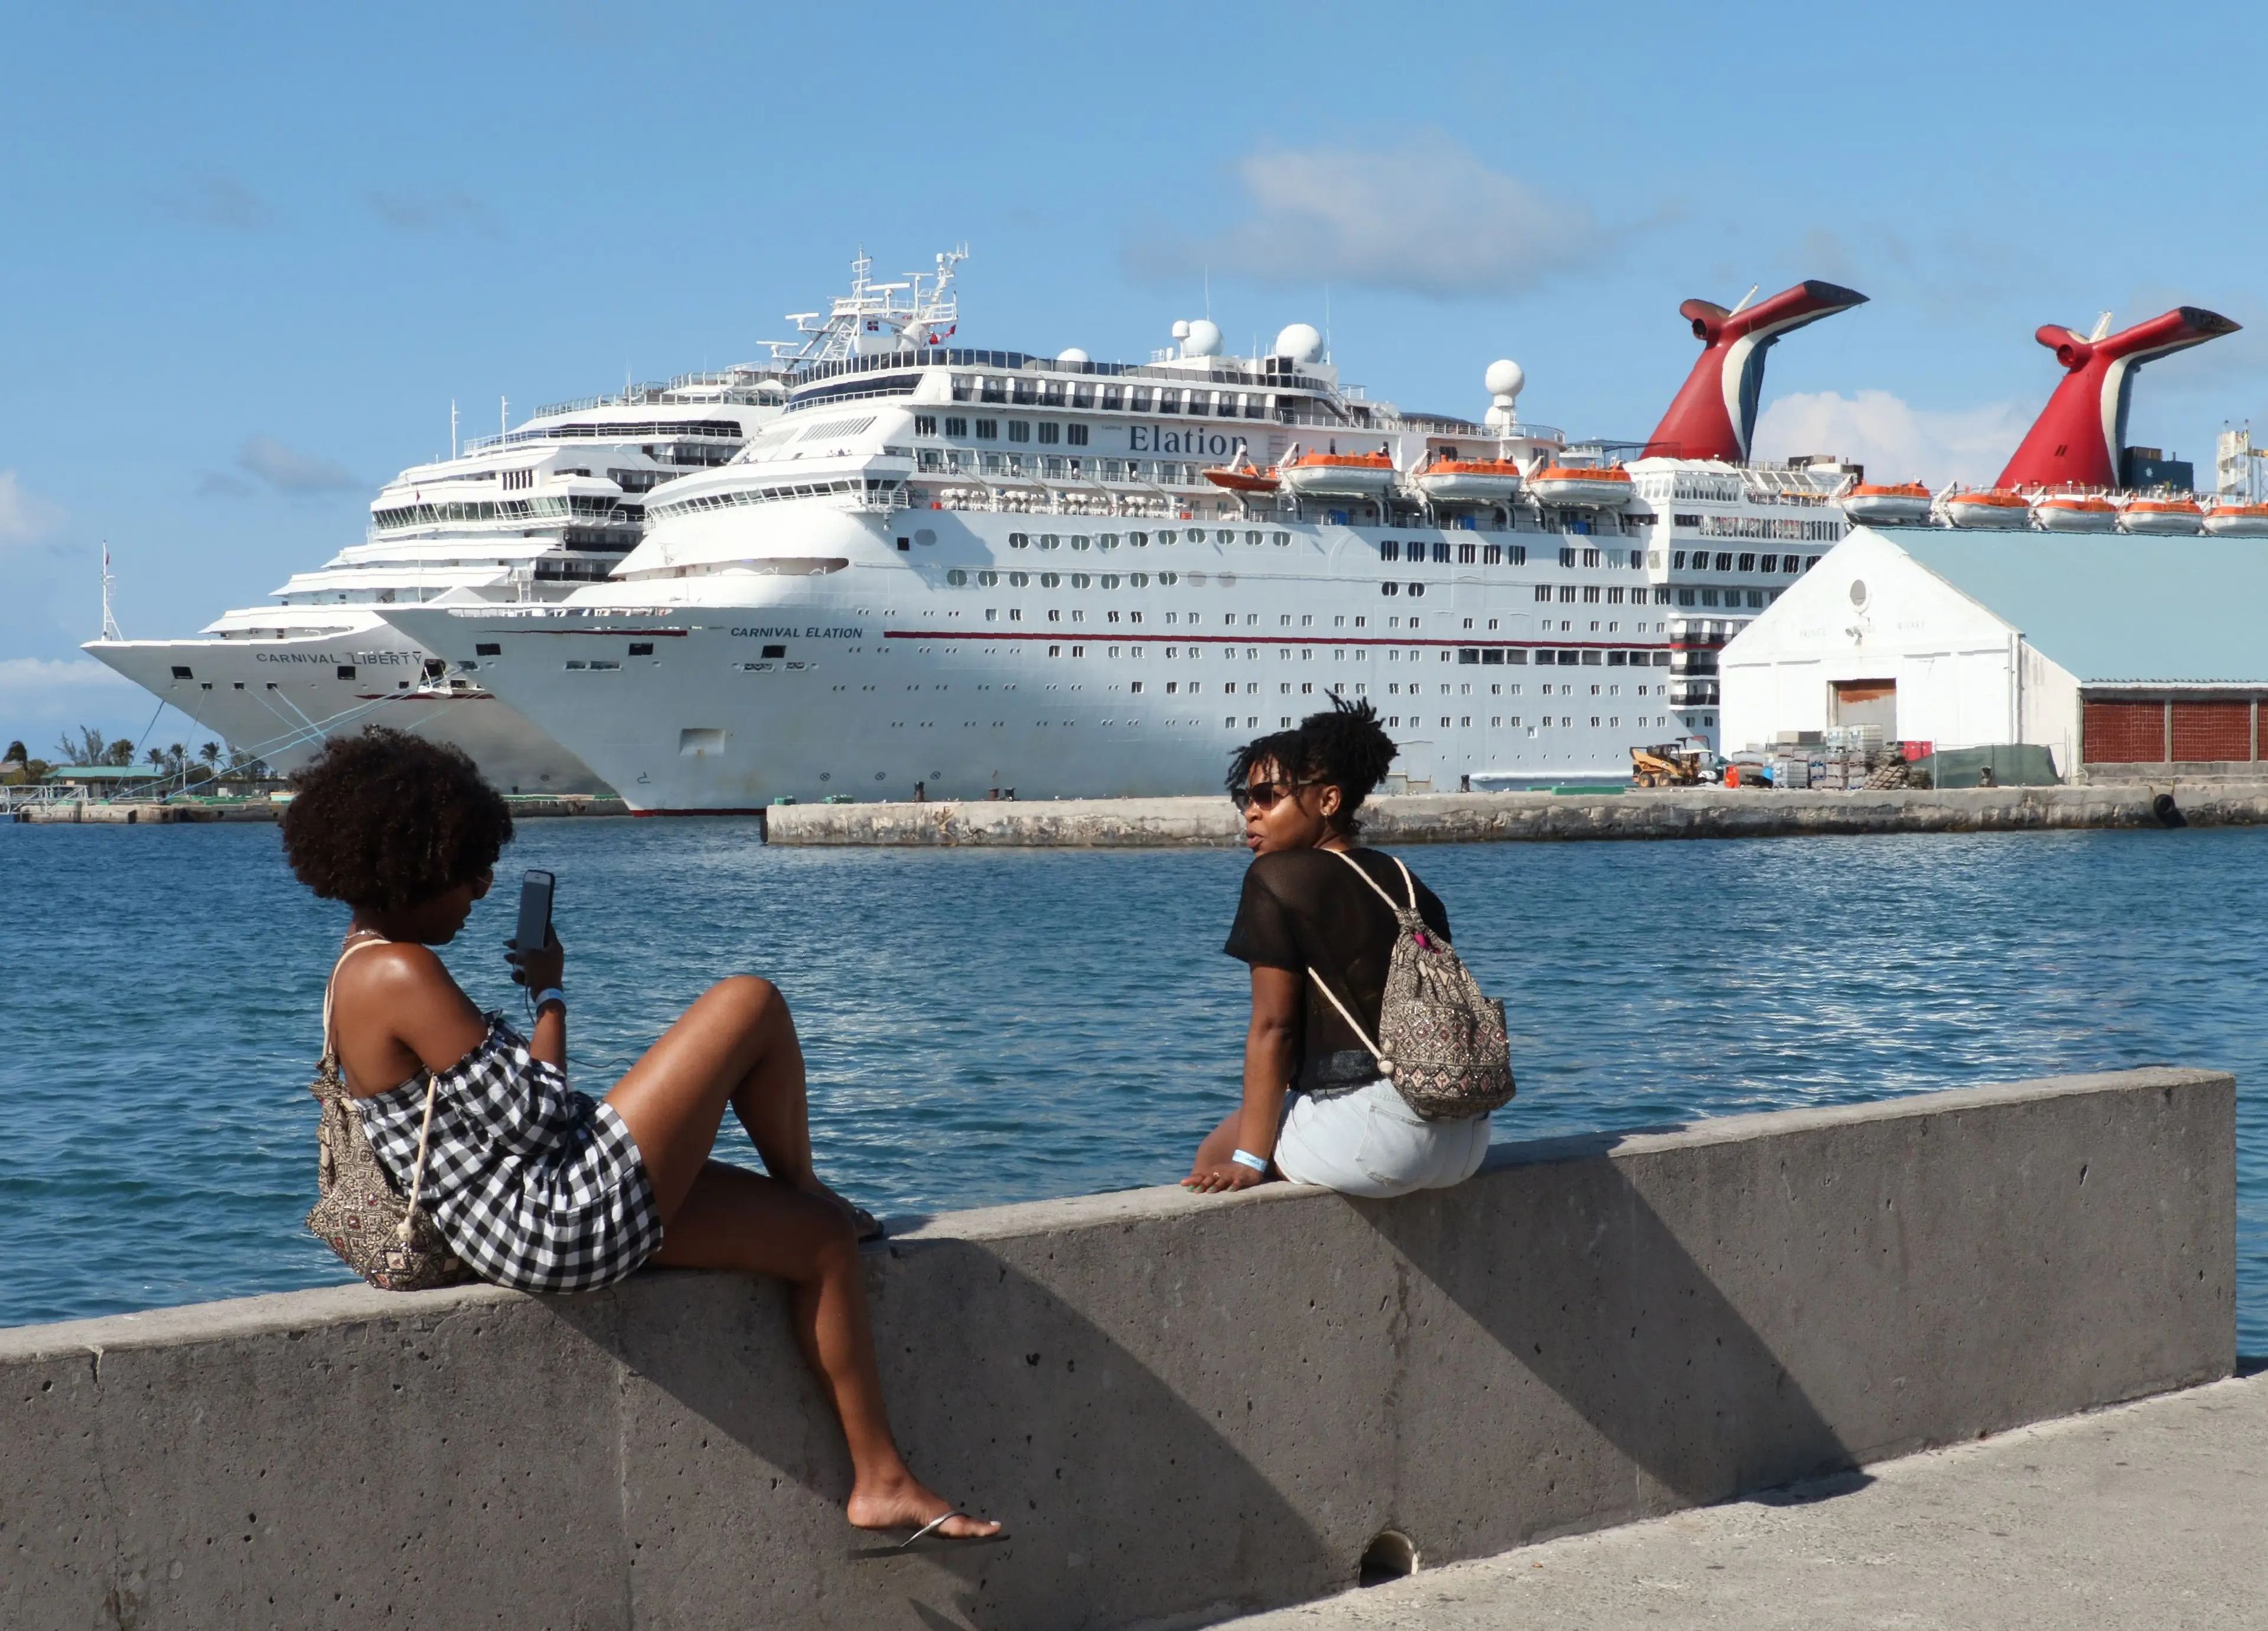 Two ladies take pictures in front of the Carnival cruise ship Elation in Nassau, Bahamas on April 29, 2019.